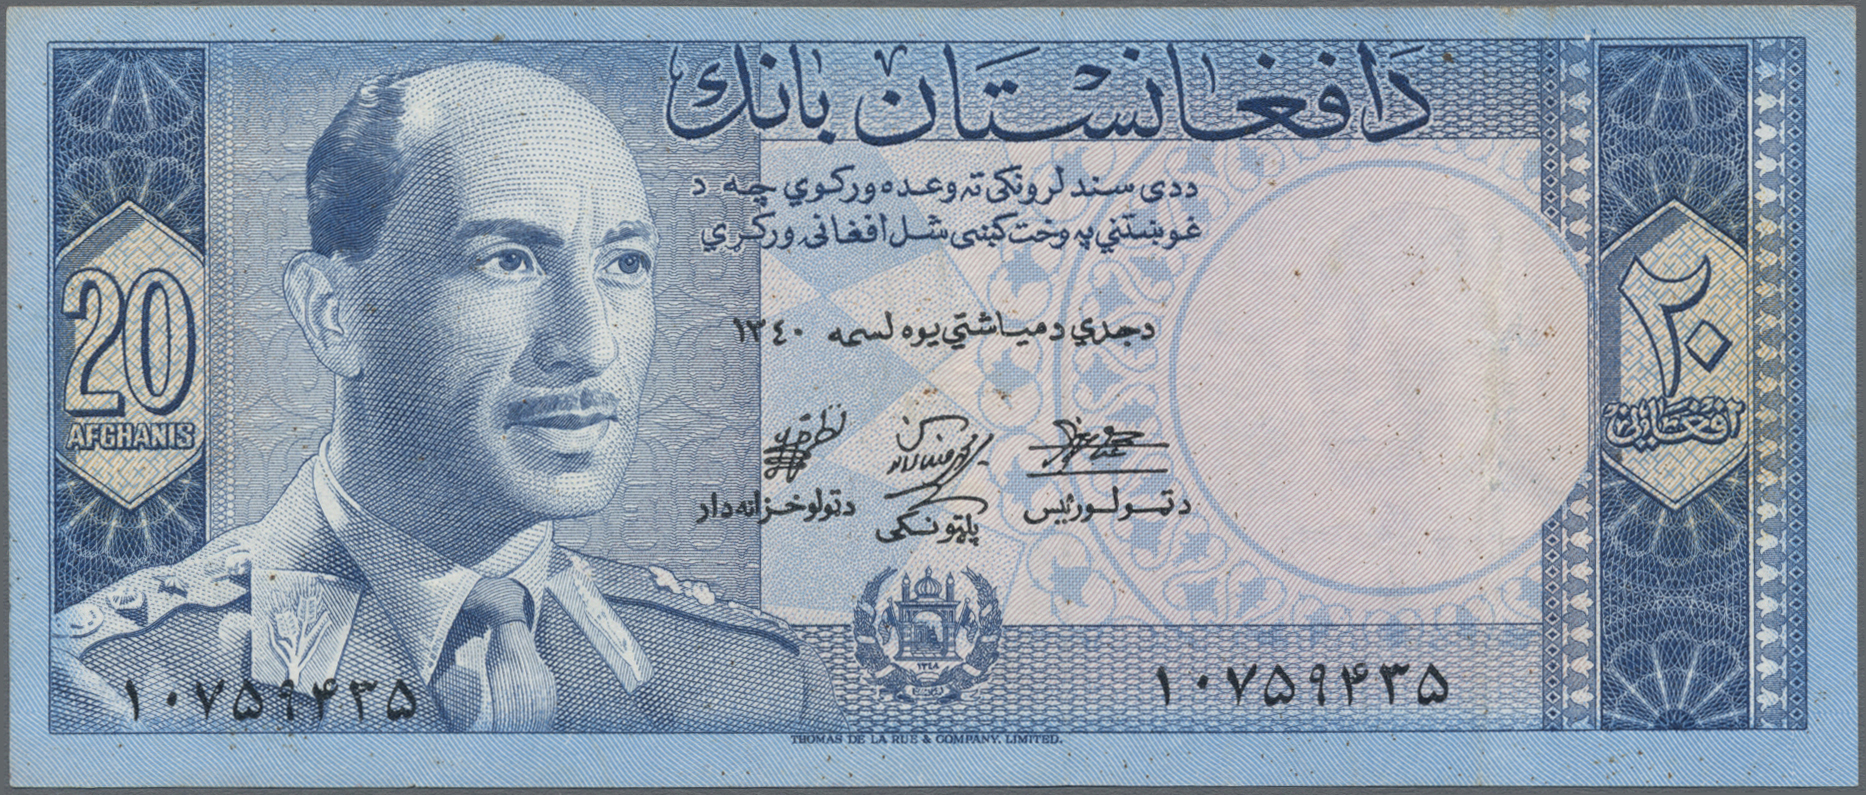 Lot 00004 - Afghanistan | Banknoten  -  Auktionshaus Christoph Gärtner GmbH & Co. KG 55th AUCTION - Day 1